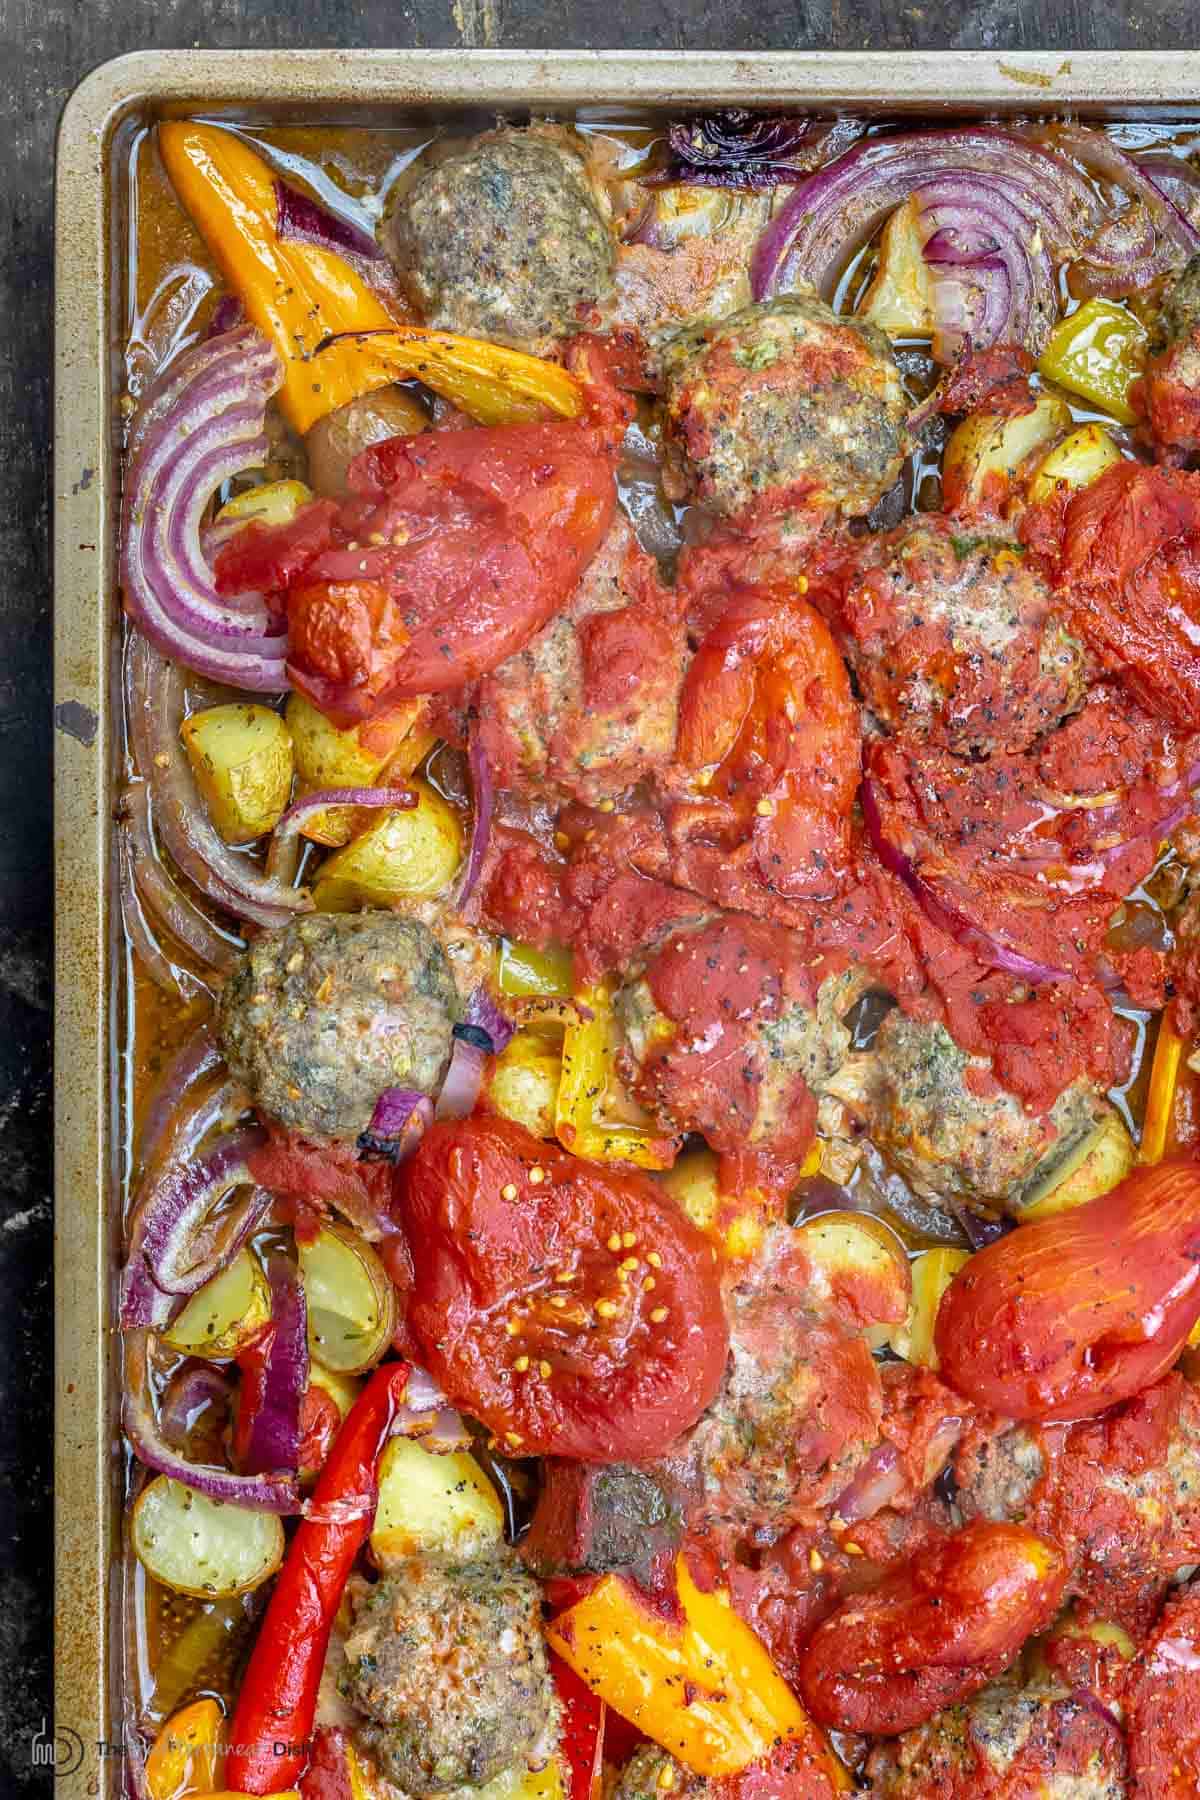 Close-up of baked meatballs with tomatoes and other vegetables in a sheet pan